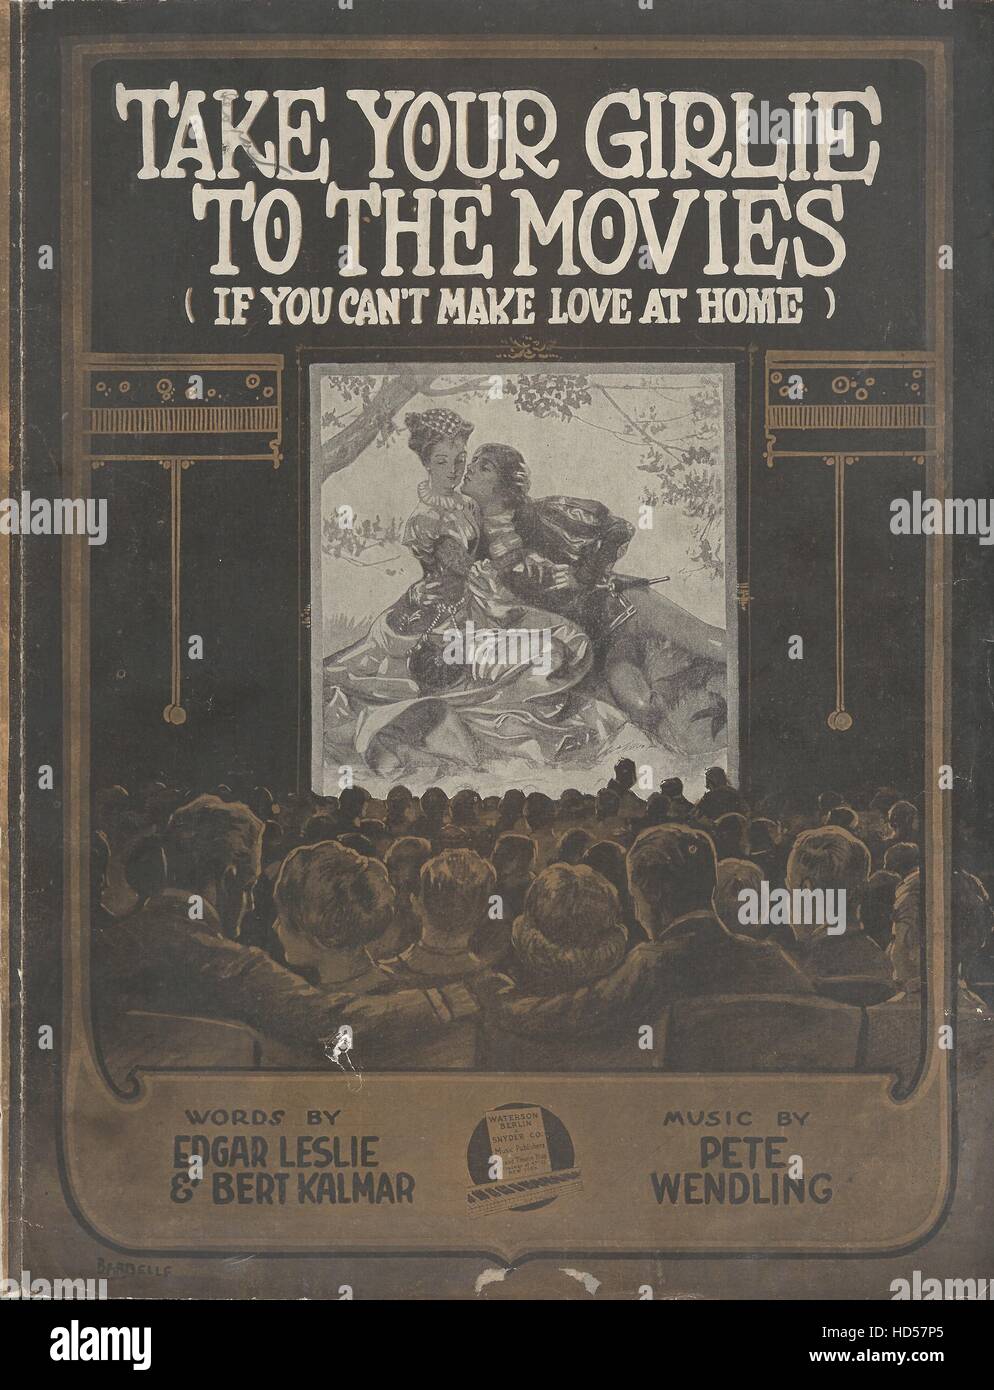 'Take Your Girlie to the Movies' 1919 Movie Sheet Music Cover. Stock Photo